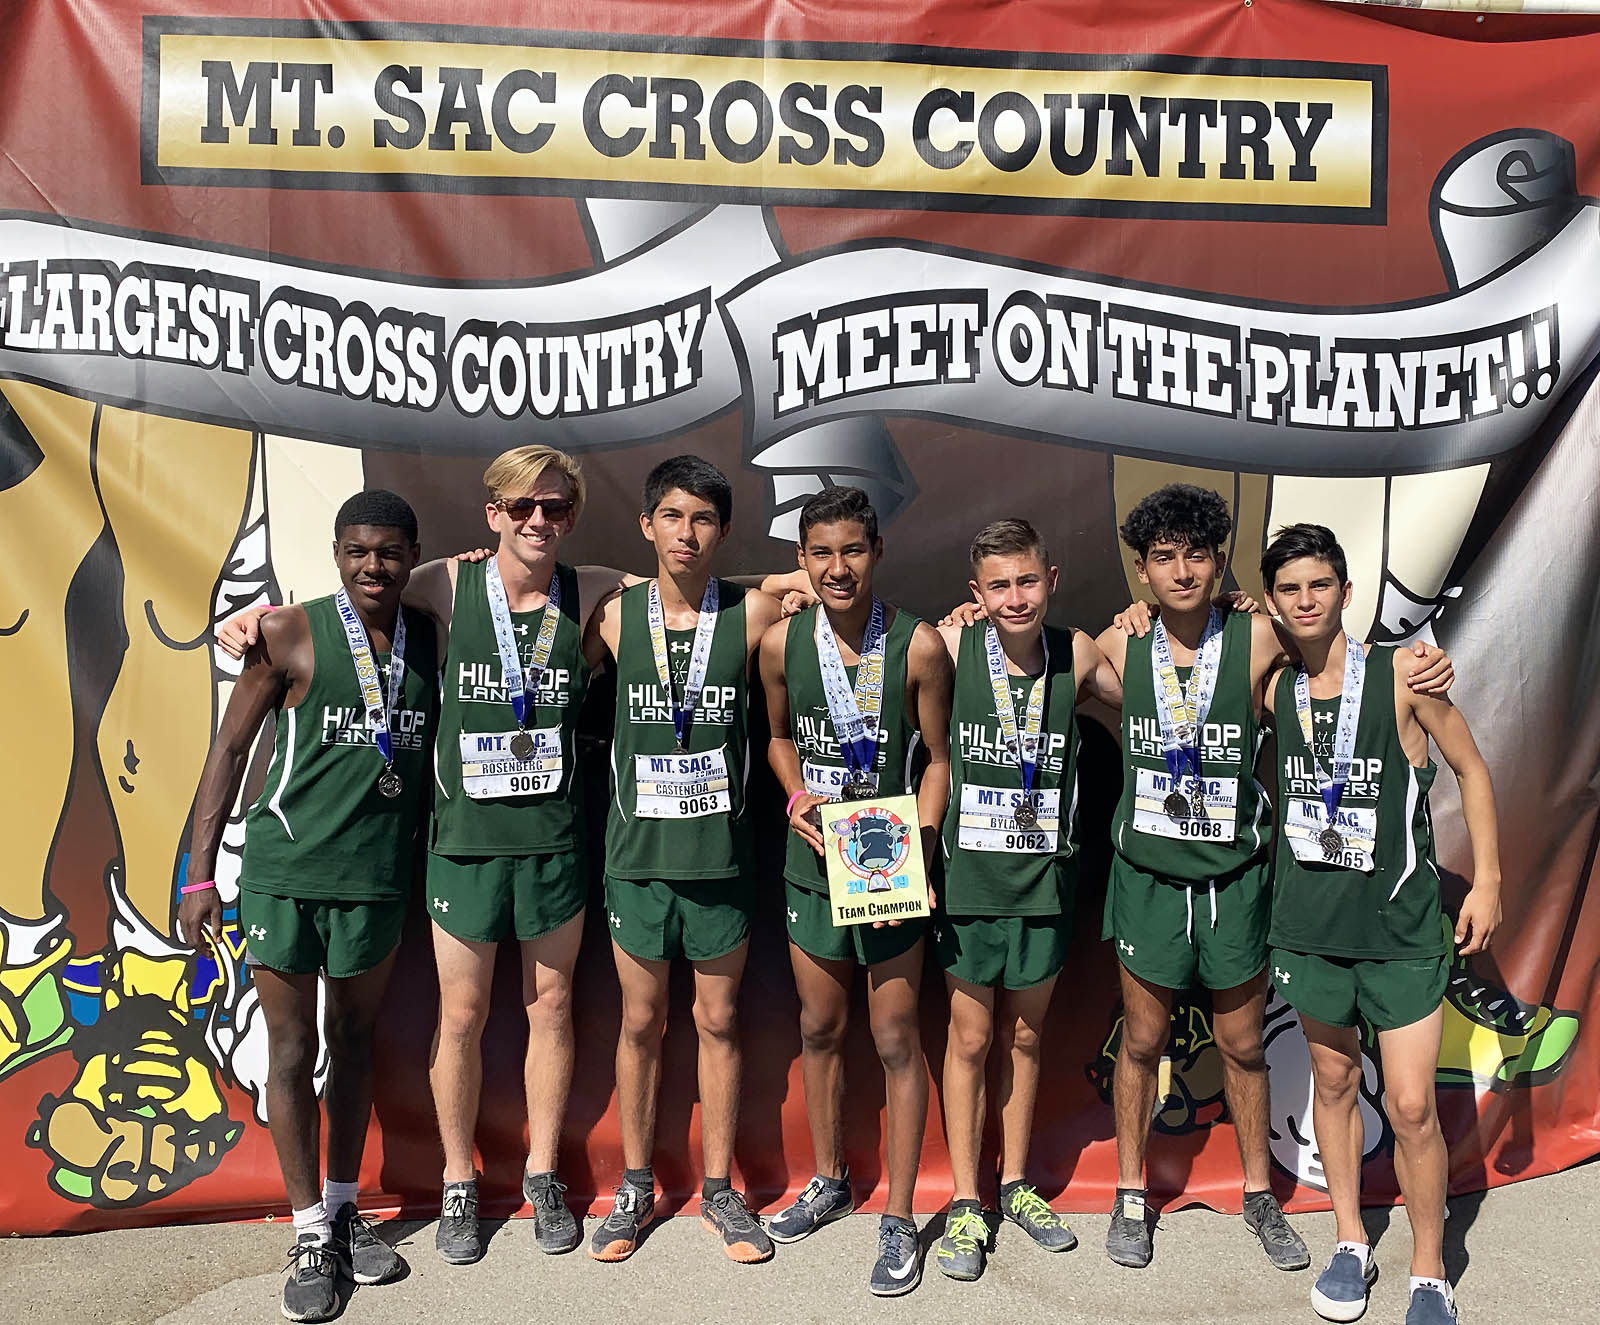 Lancer harriers continue to excel, win division title at Mt. SAC